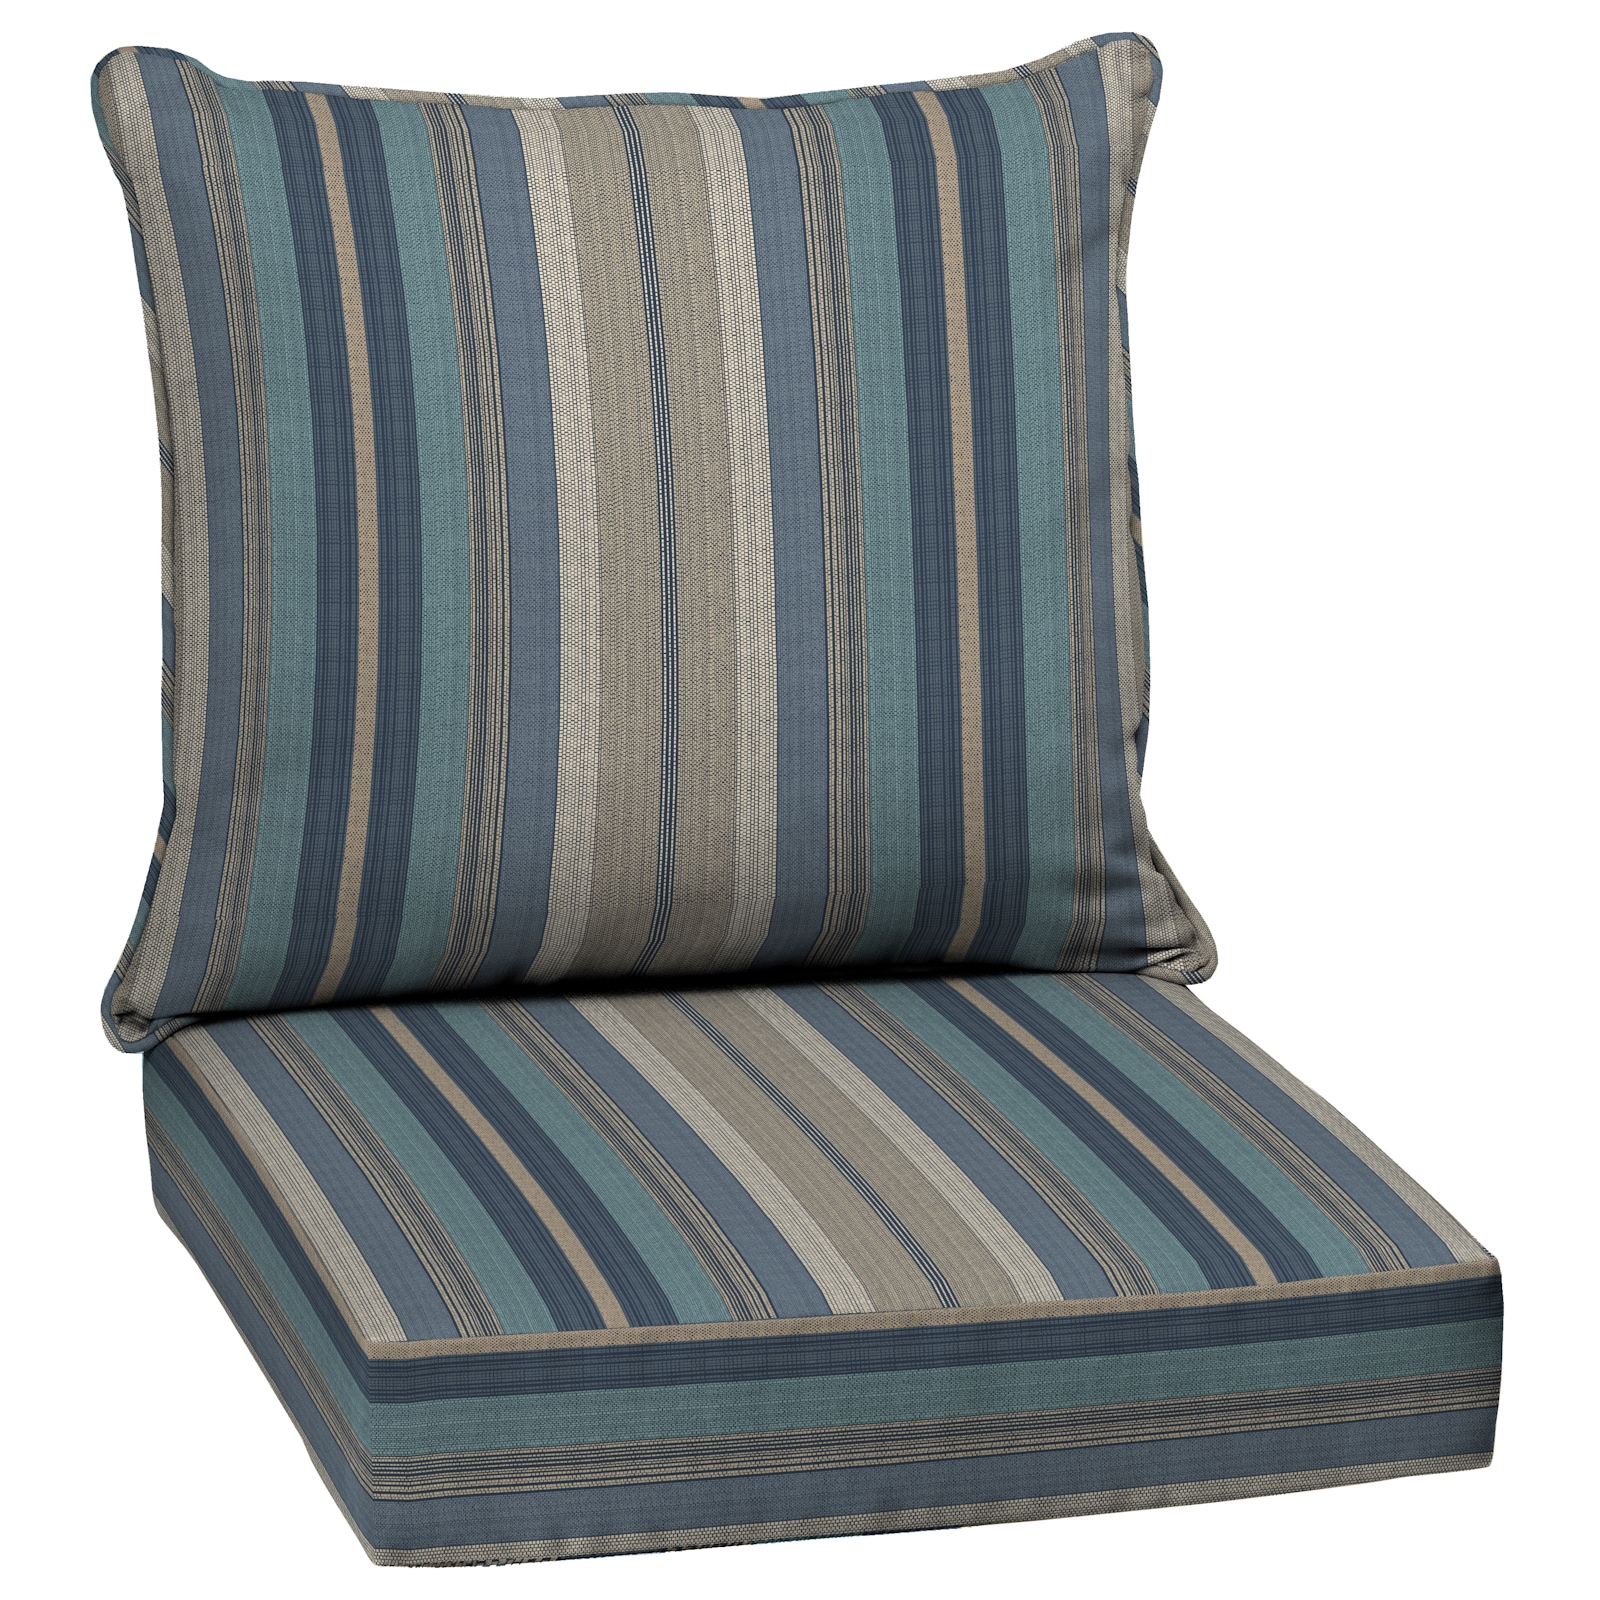 Allen Roth 2 Piece Deep Seat Patio Chair Cushion In The Furniture Cushions Department At Com - Allen And Roth Patio Pillows